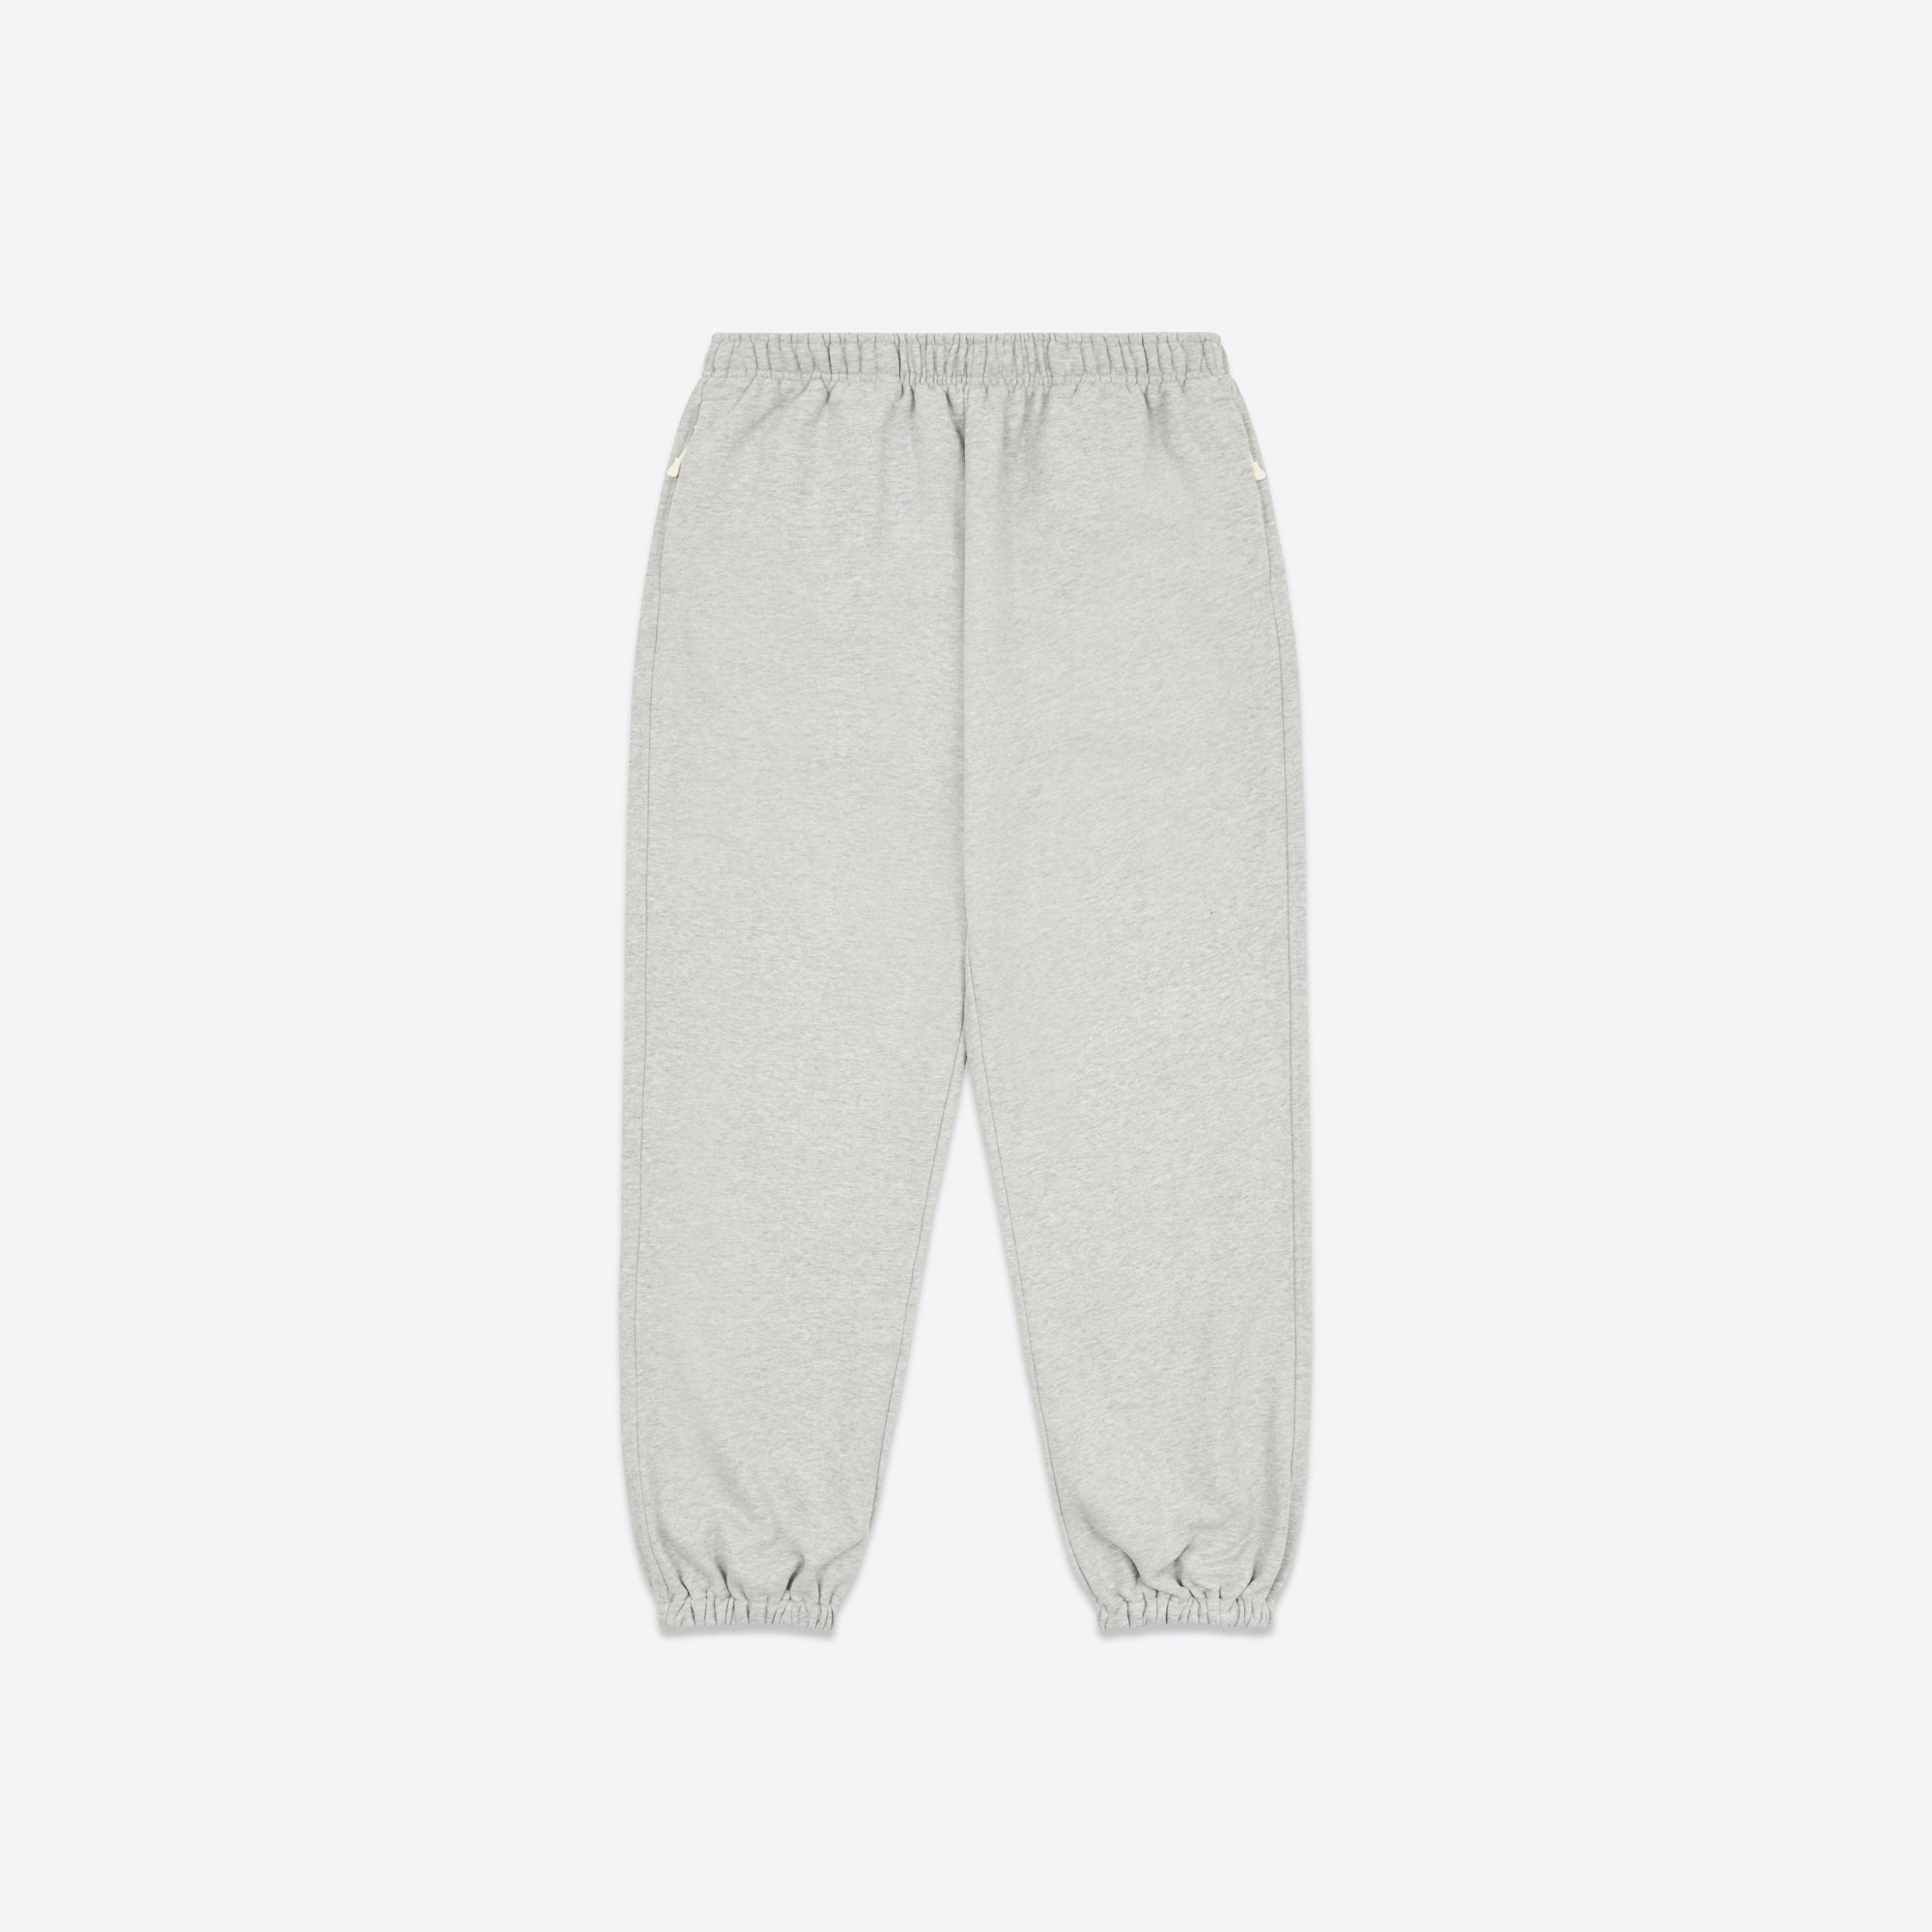 Alfred's Apartment - Trusted Cuffed Sweatpant - Marle